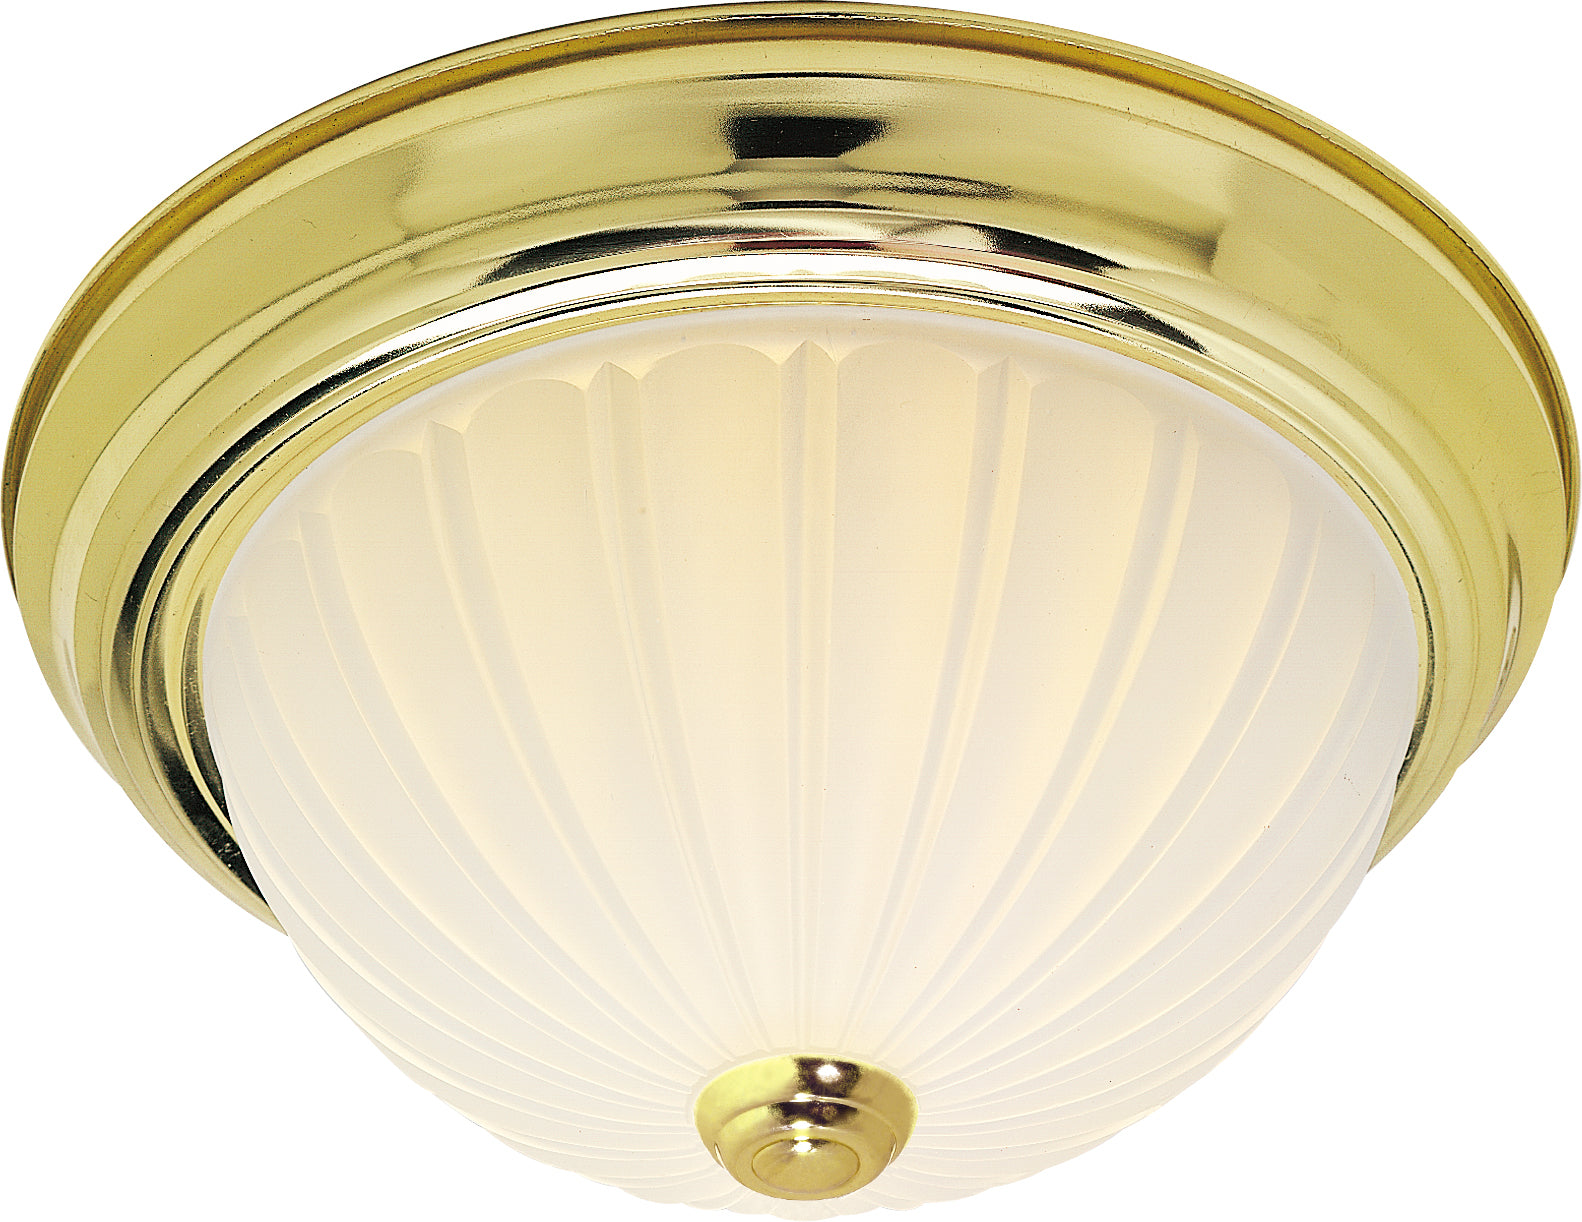 Nuvo 2-Light 11" Flush Mount w/ Frosted Melon Glass in Polished Brass Finish